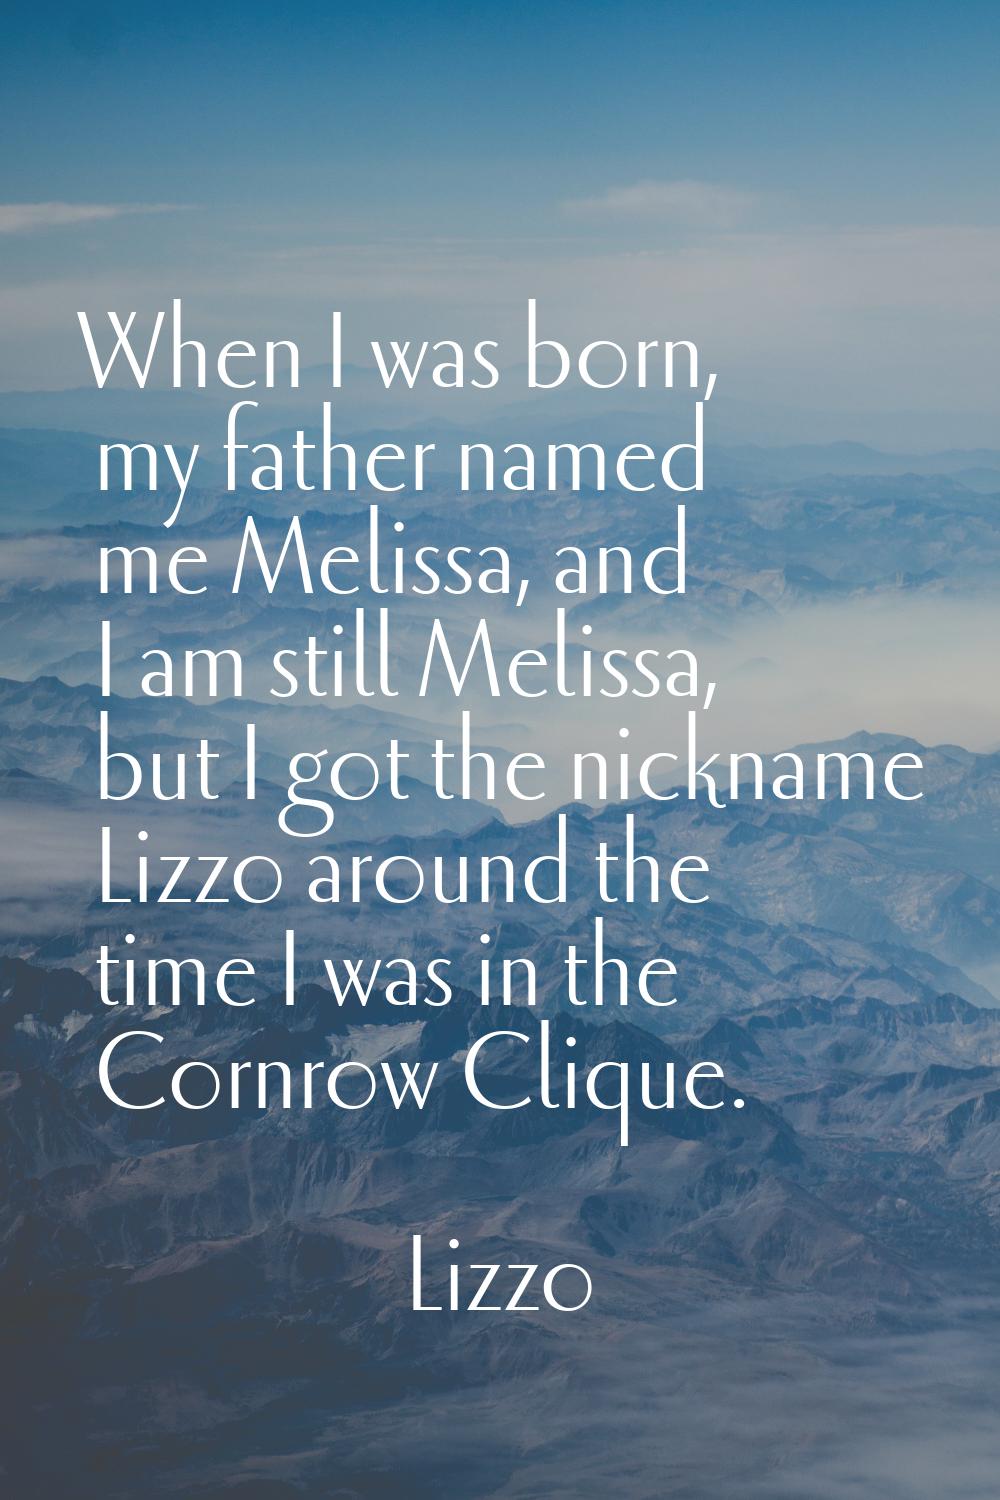 When I was born, my father named me Melissa, and I am still Melissa, but I got the nickname Lizzo a